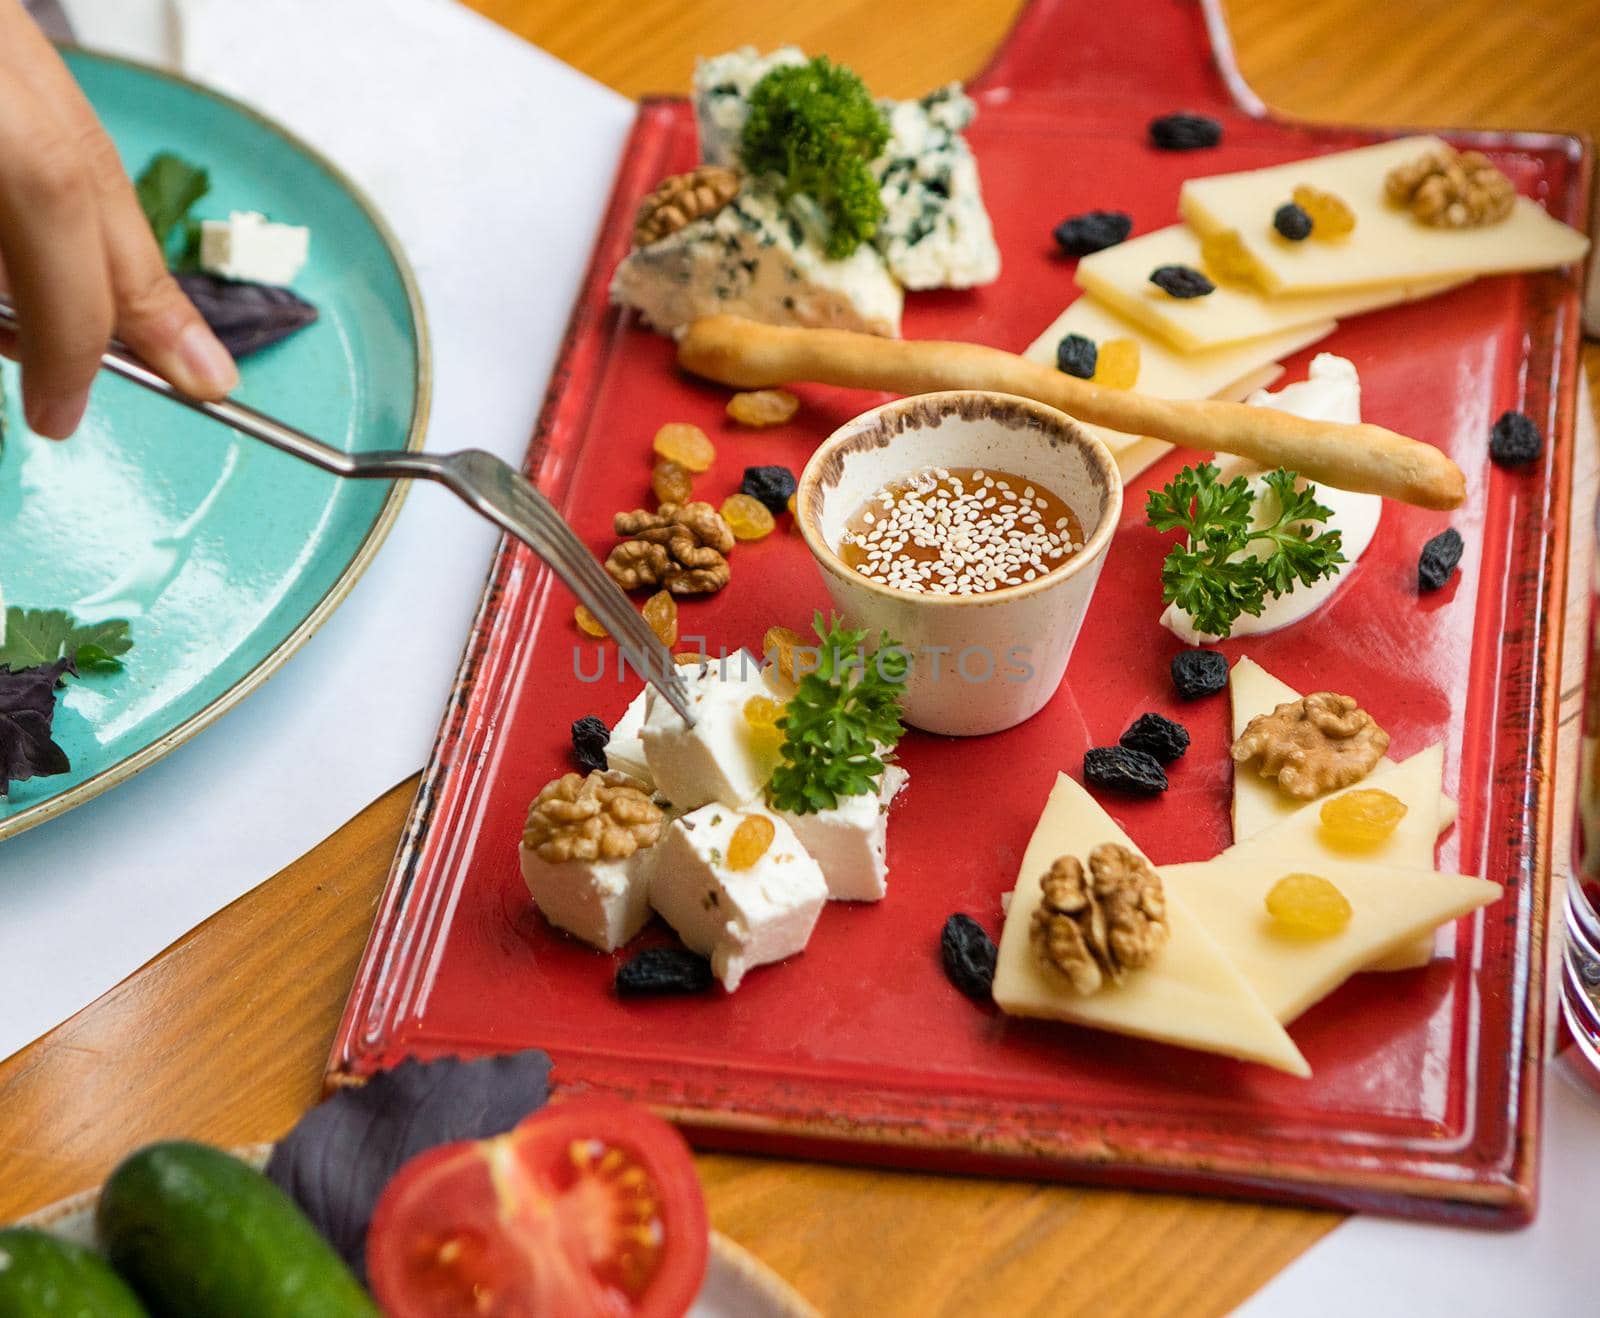 Cheese assorti on the red plate by ferhad